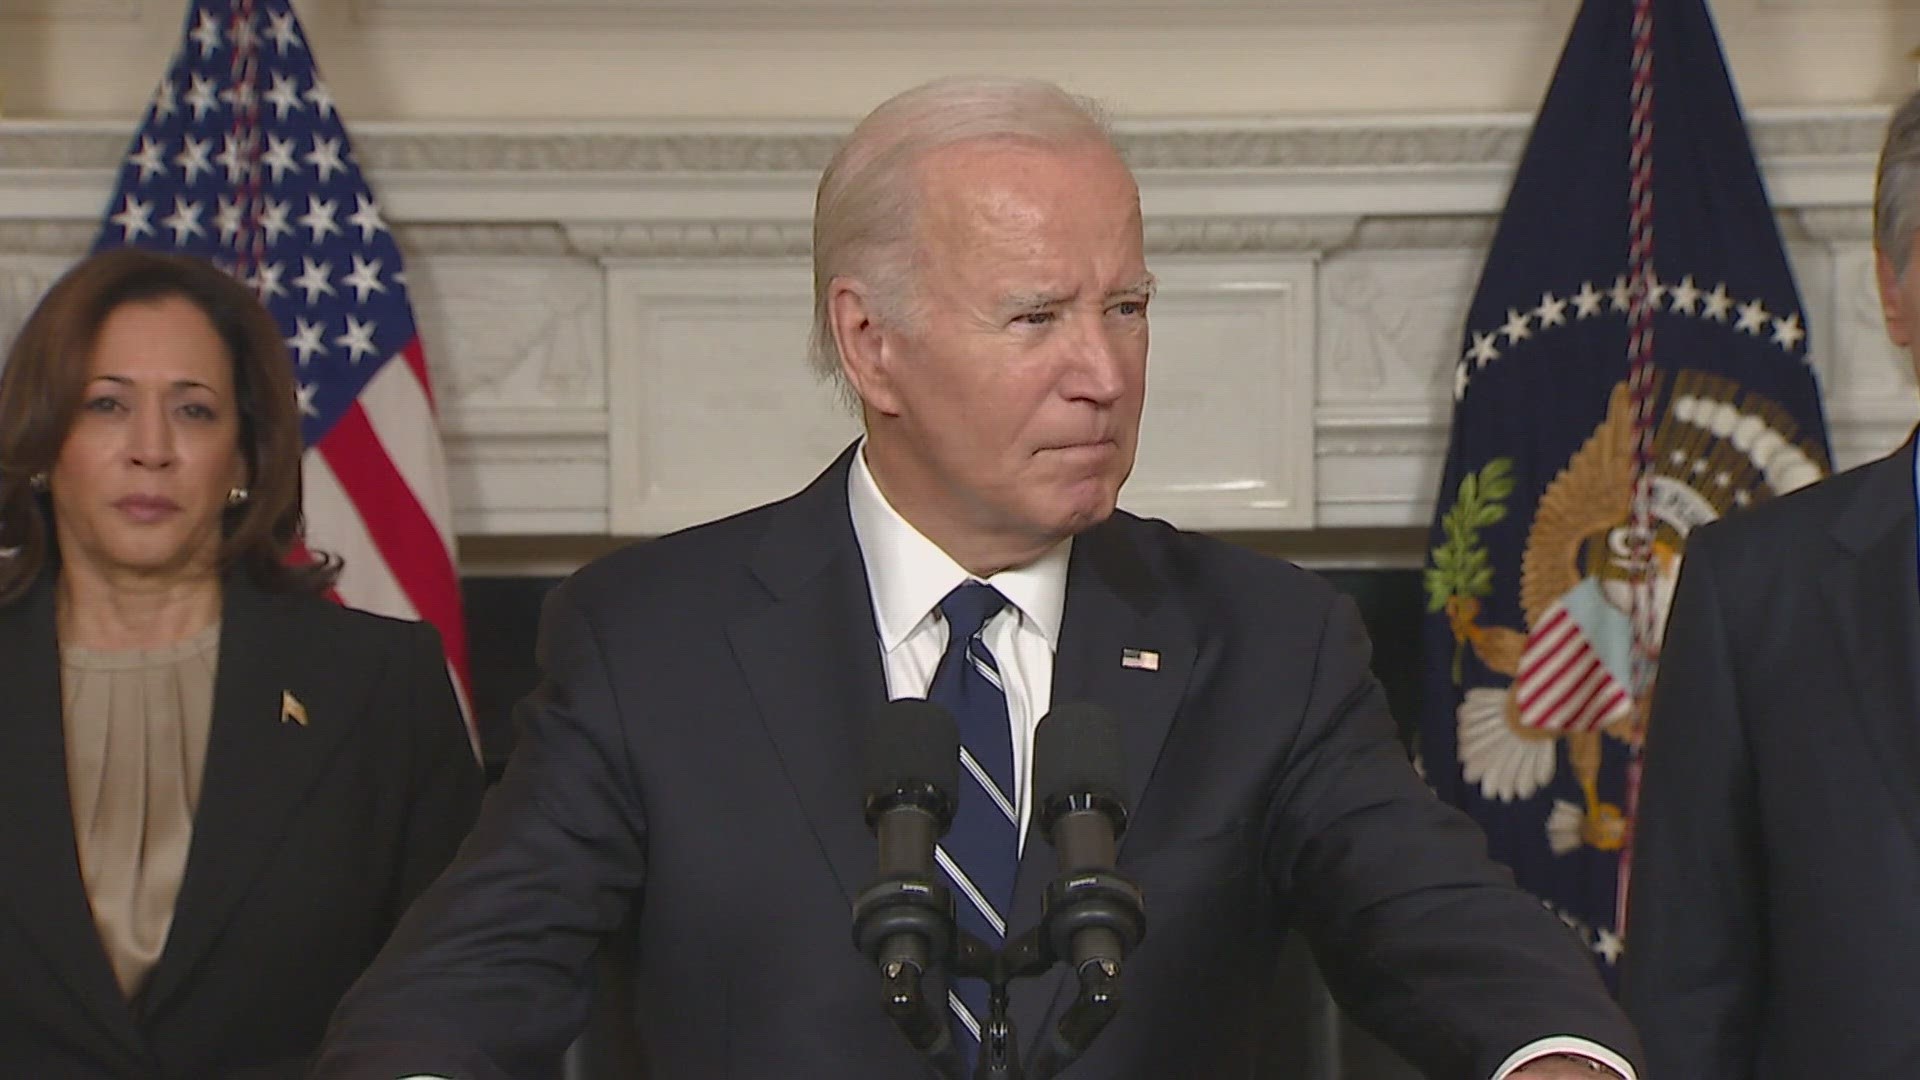 President Biden has repeatedly emphasized his shock over the breadth and brutality of the Hamas assault.